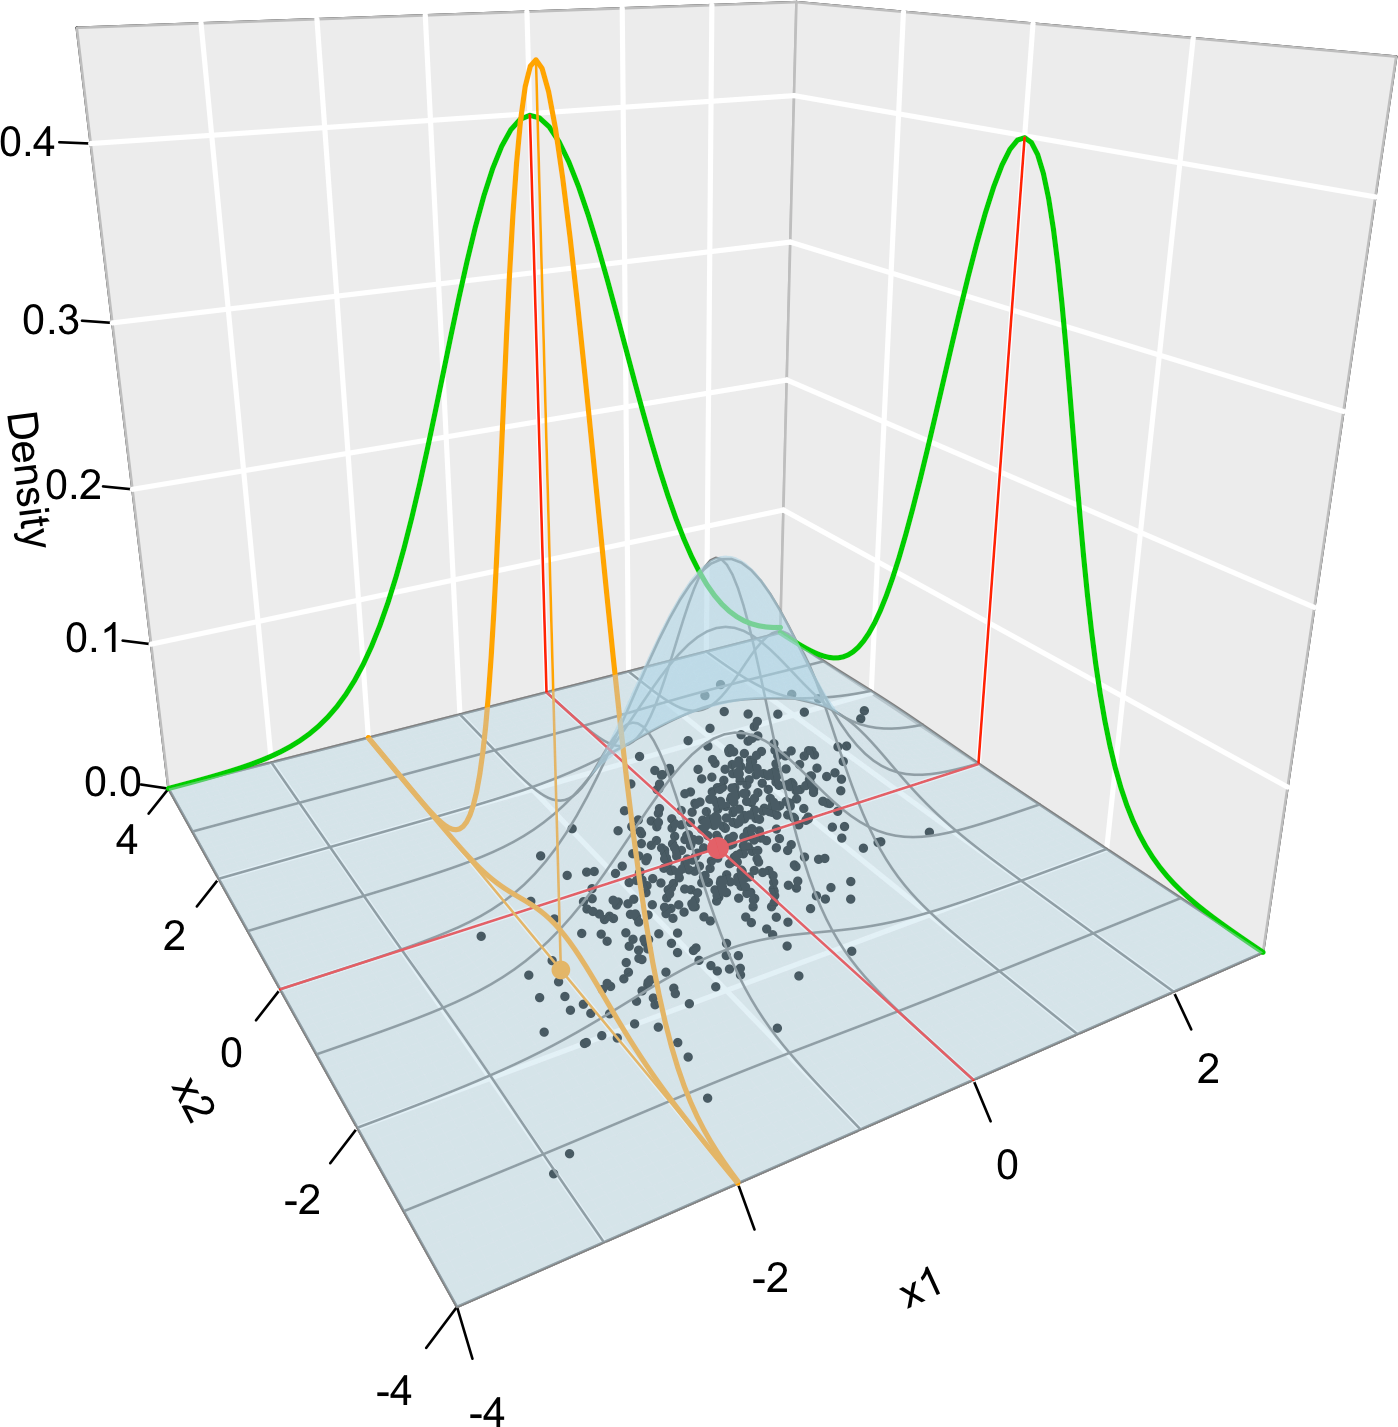 Visualization of the joint pdf (in blue), marginal pdfs (green), conditional pdf of \(X_2| X_1=x_1\) (orange), expectation (red point), and conditional expectation \(\mathbb{E}\lbrack X_2 | X_1=x_1 \rbrack\) (orange point) of a \(2\)-dimensional normal. The conditioning point of \(X_1\) is \(x_1=-2.\) Note the different scales of the densities, as they have to integrate one over different supports. Note how the conditional density (upper orange curve) is not the joint pdf \(f(x_1,x_2)\) (lower orange curve) with \(x_1=-2\) but its rescaling by \(\frac{1}{f_{X_1}(x_1)}.\) The parameters of the \(2\)-dimensional normal are \(\mu_1=\mu_2=0,\) \(\sigma_1=\sigma_2=1\) and \(\rho=0.75\) (see Exercise 1.9). \(500\) observations sampled from the distribution are shown in black.